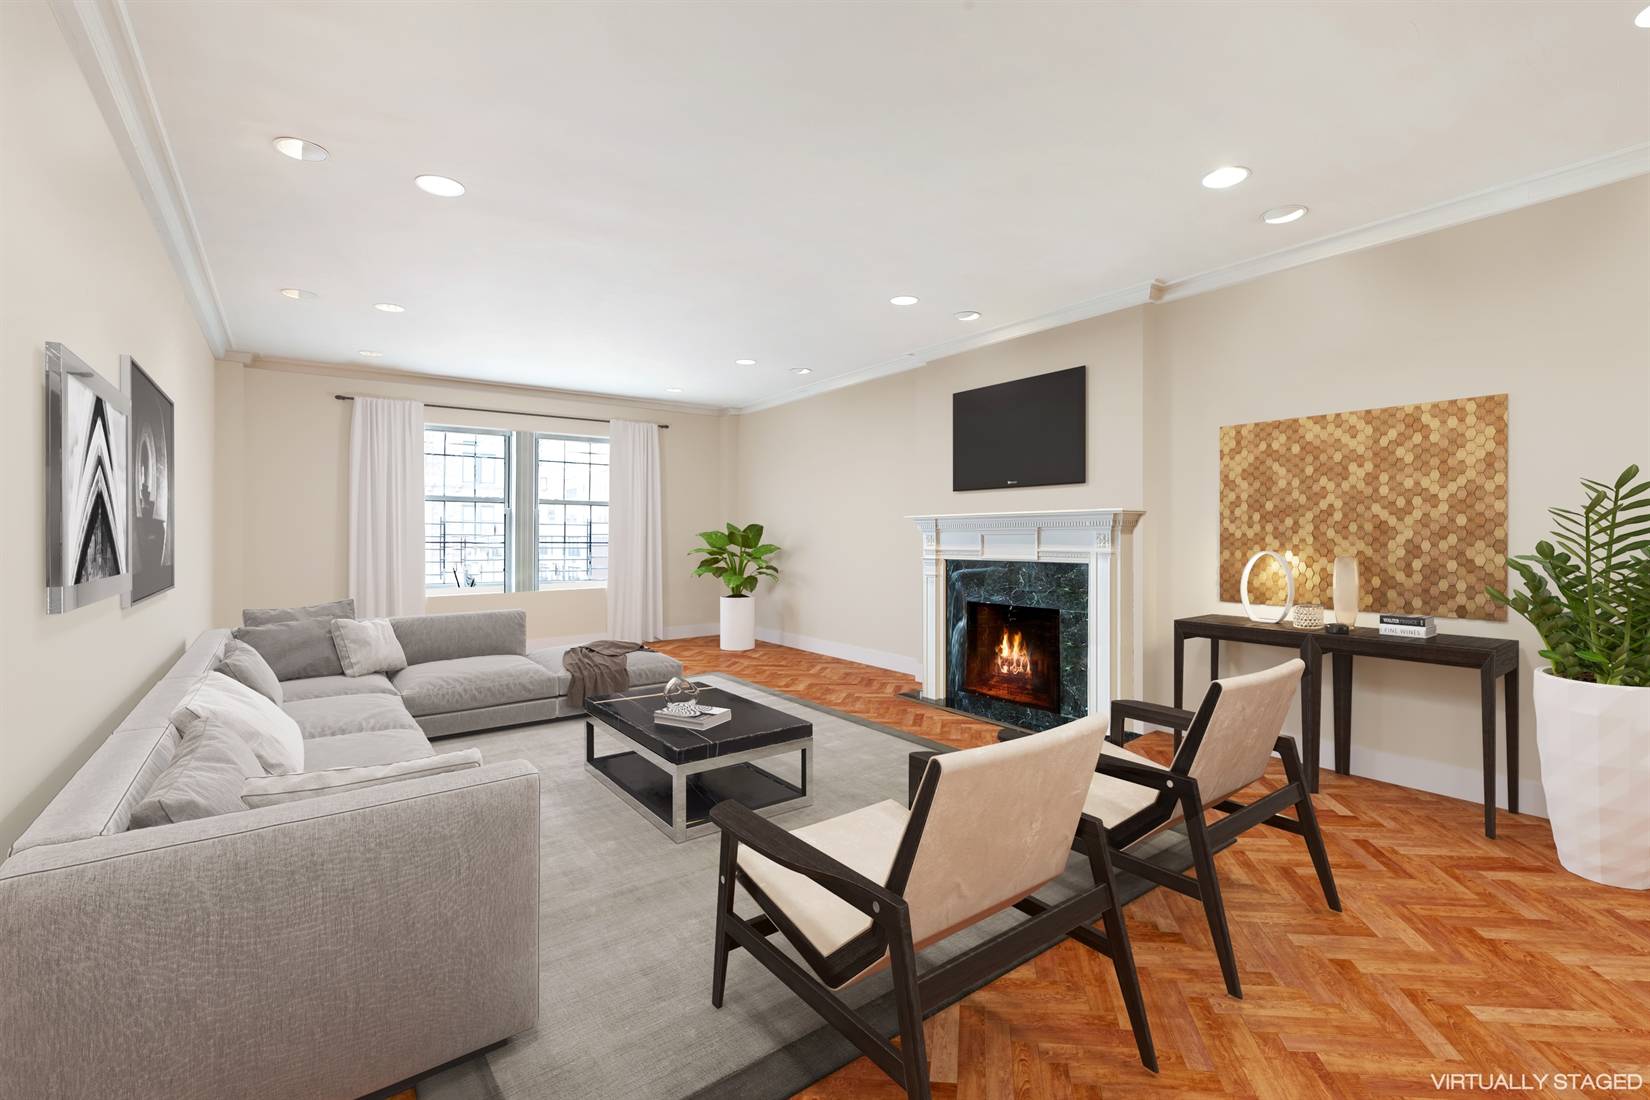 Grand 12 room home now available in one of Park Avenue's premiere white glove cooperatives.